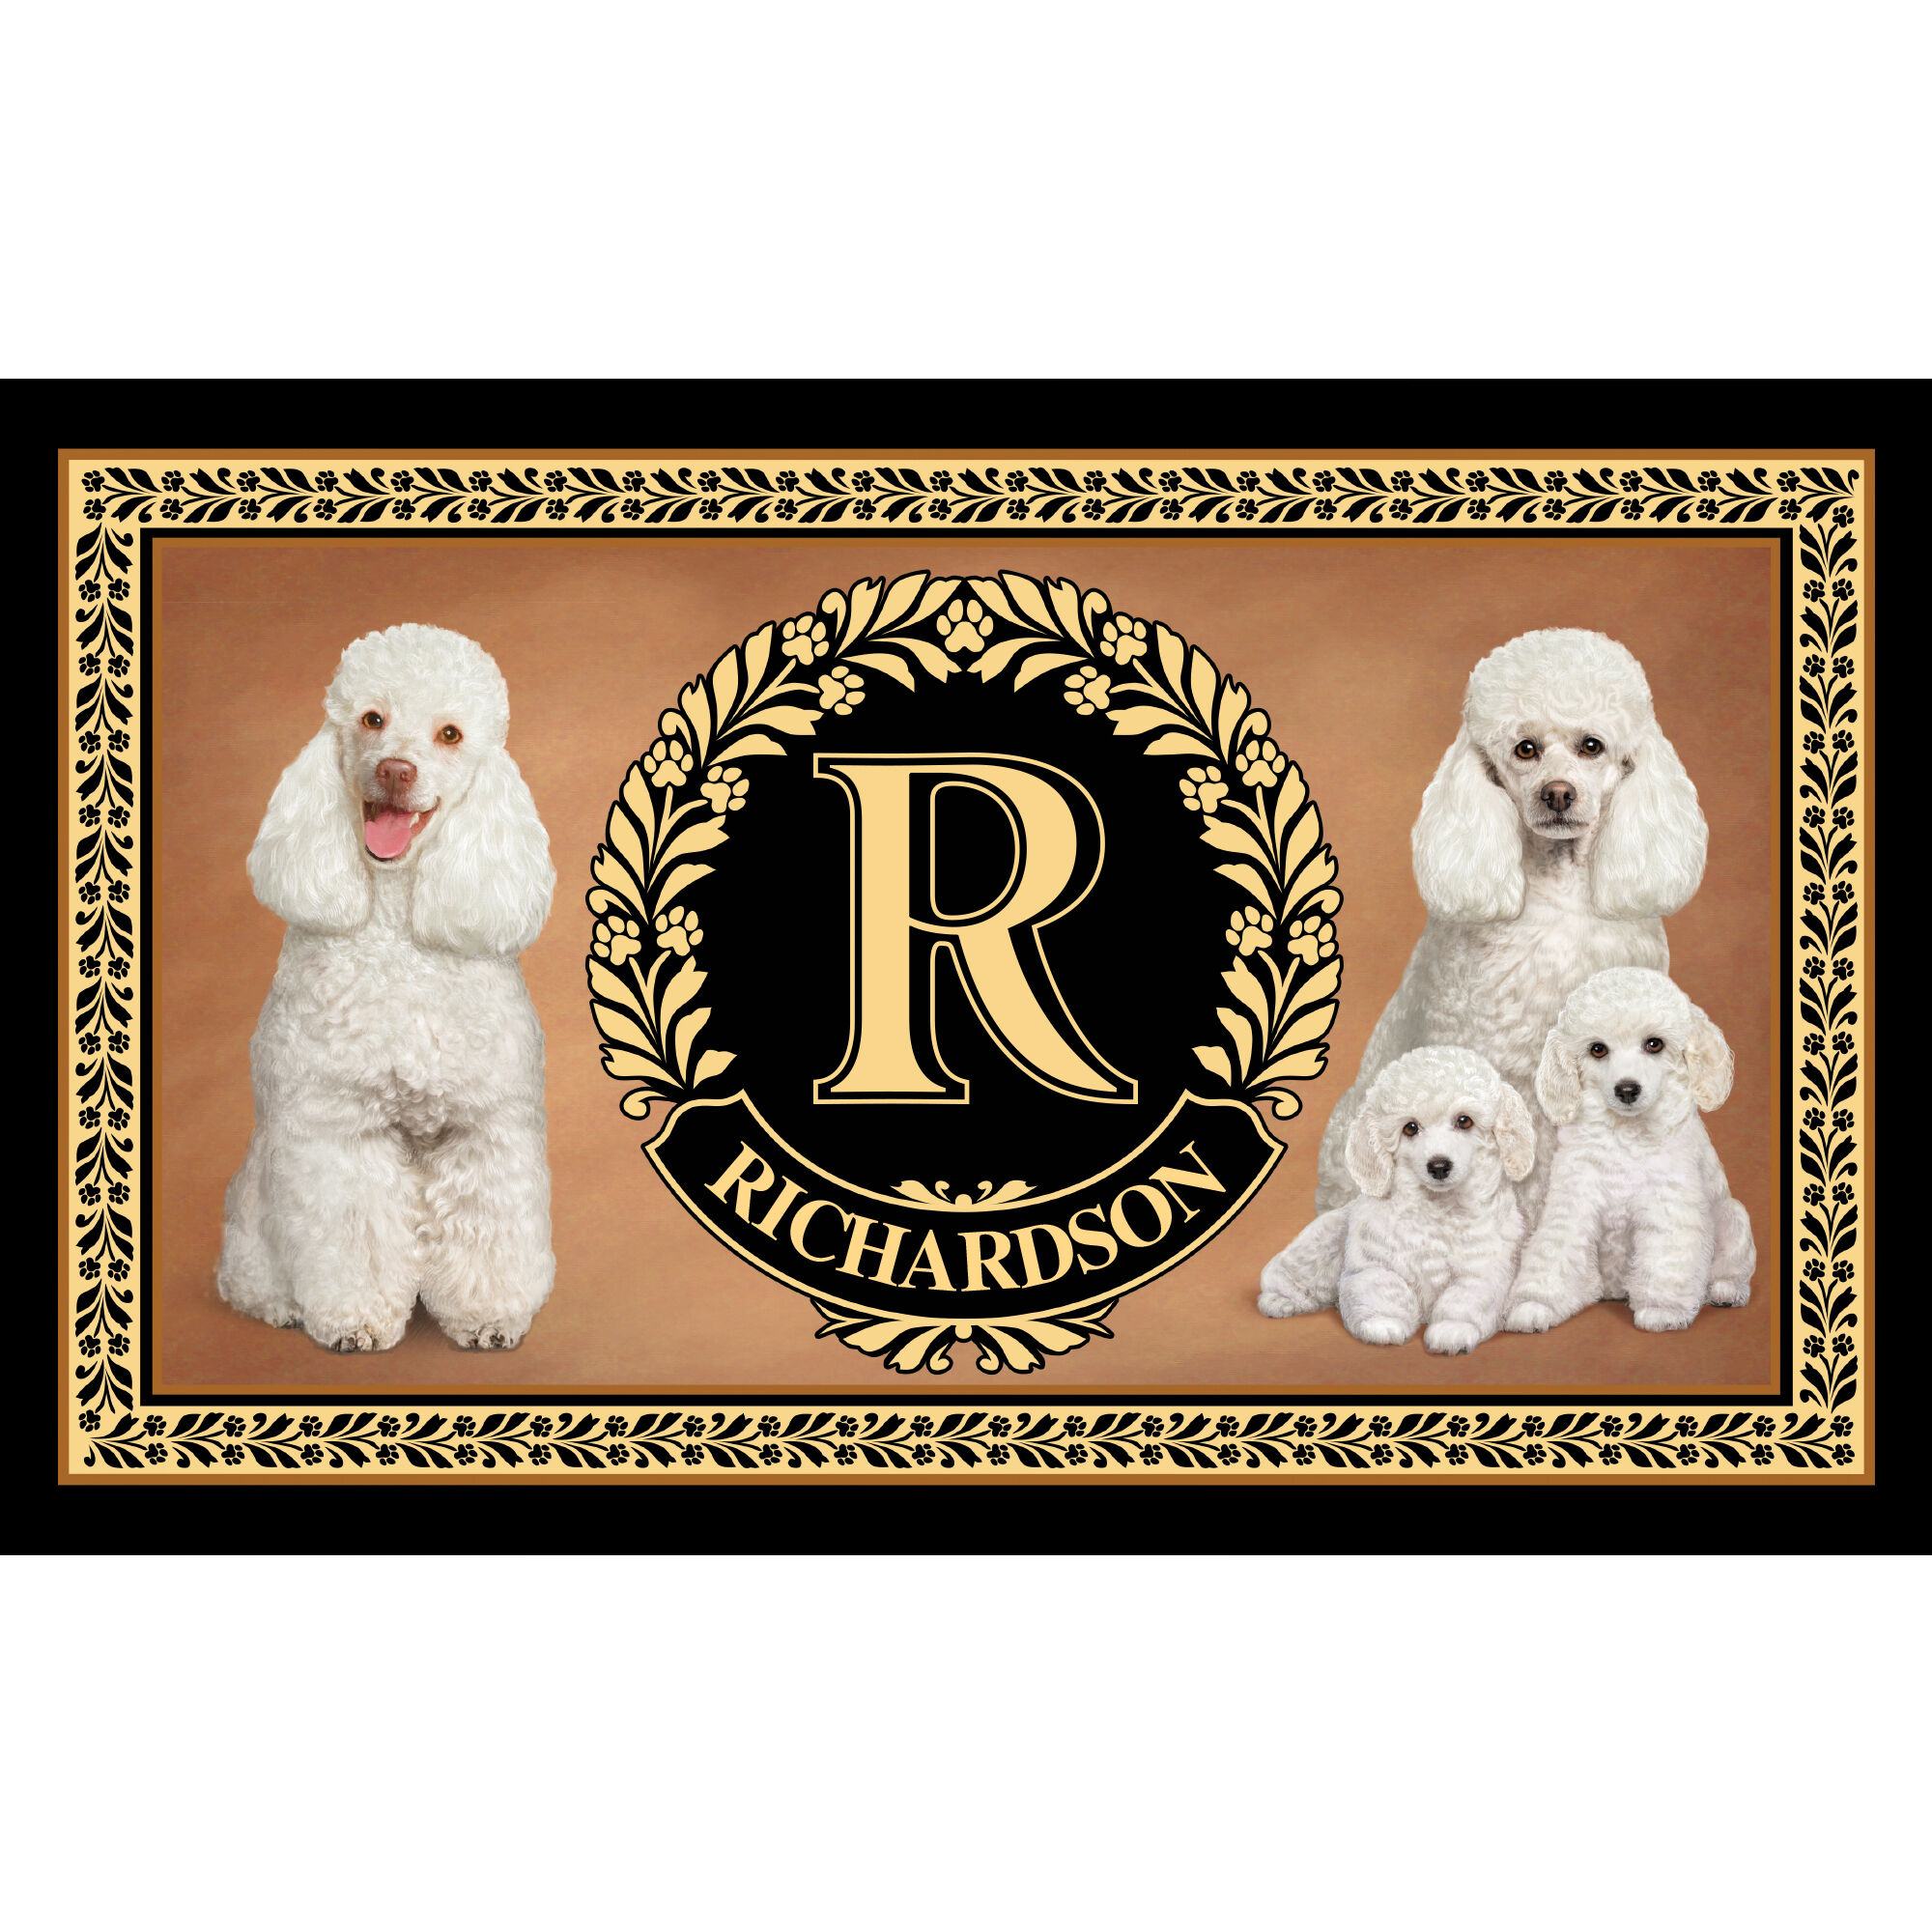 The Dog Accent Rug 6859 0033 a Poodle White